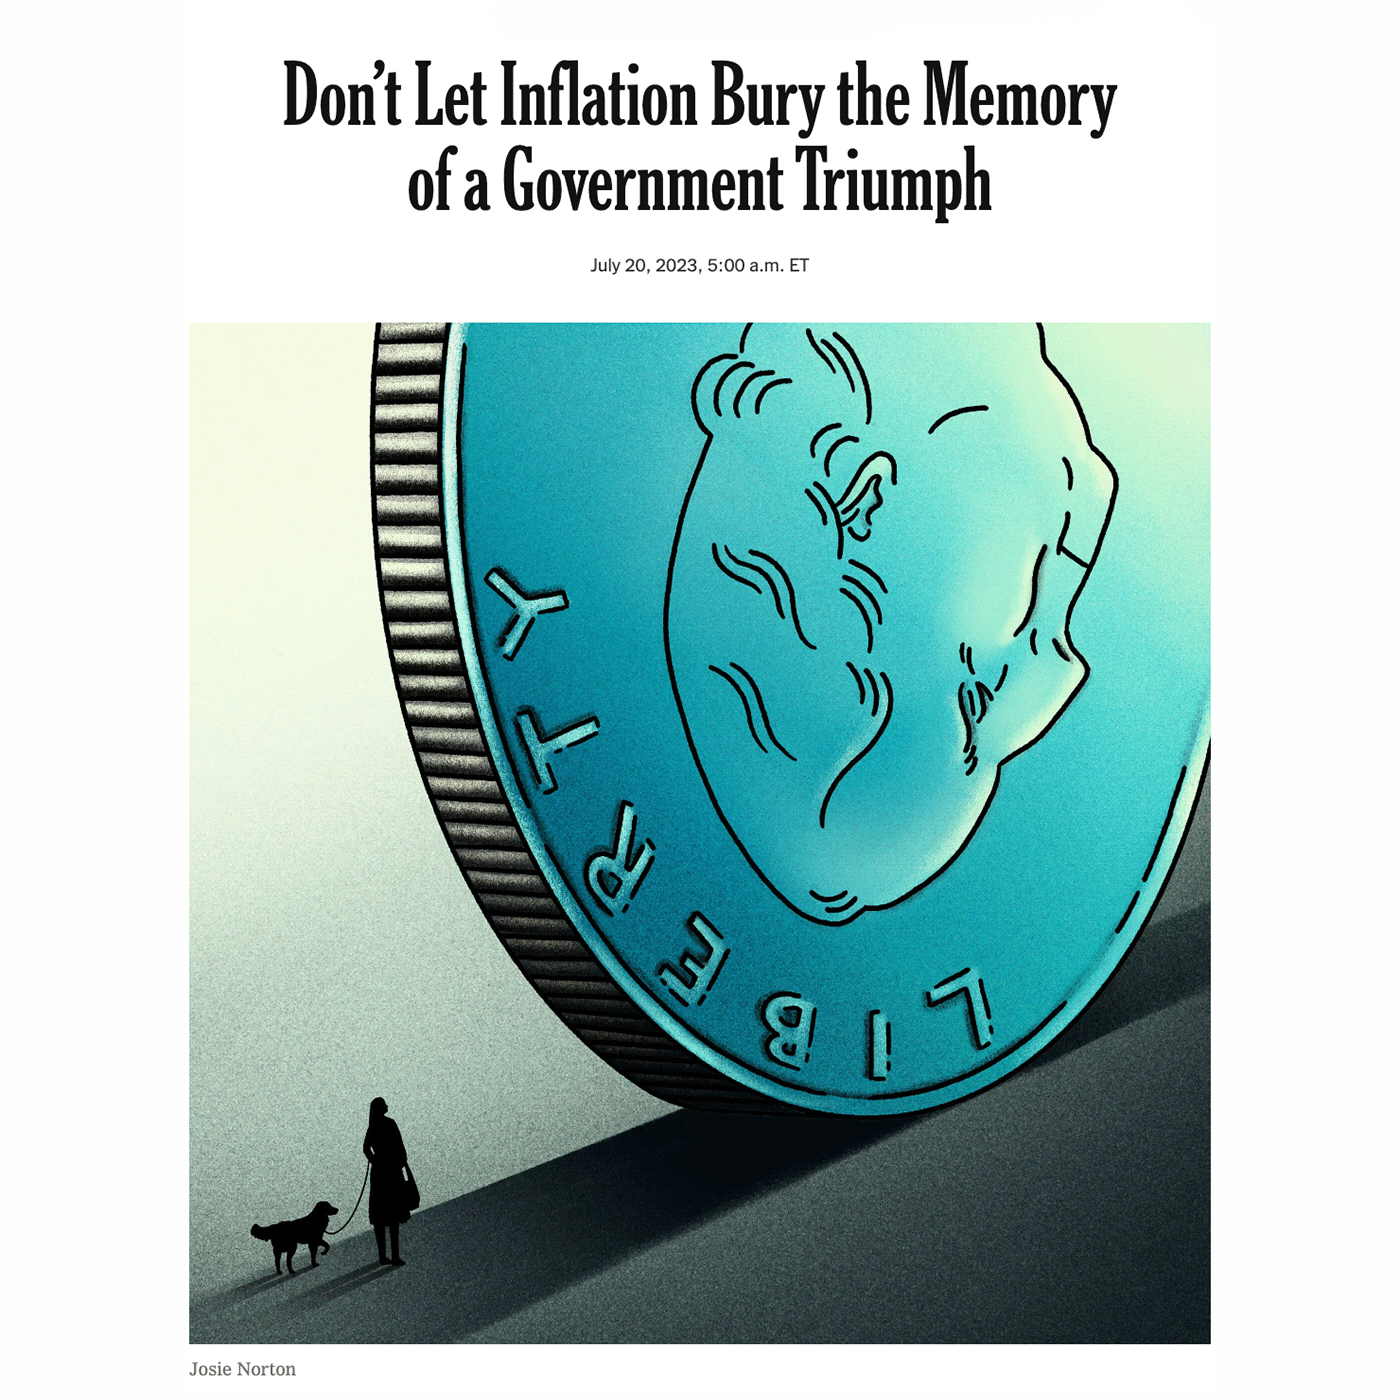 finance New York Times Editorial Illustration quarter coin money currency inflation news economy